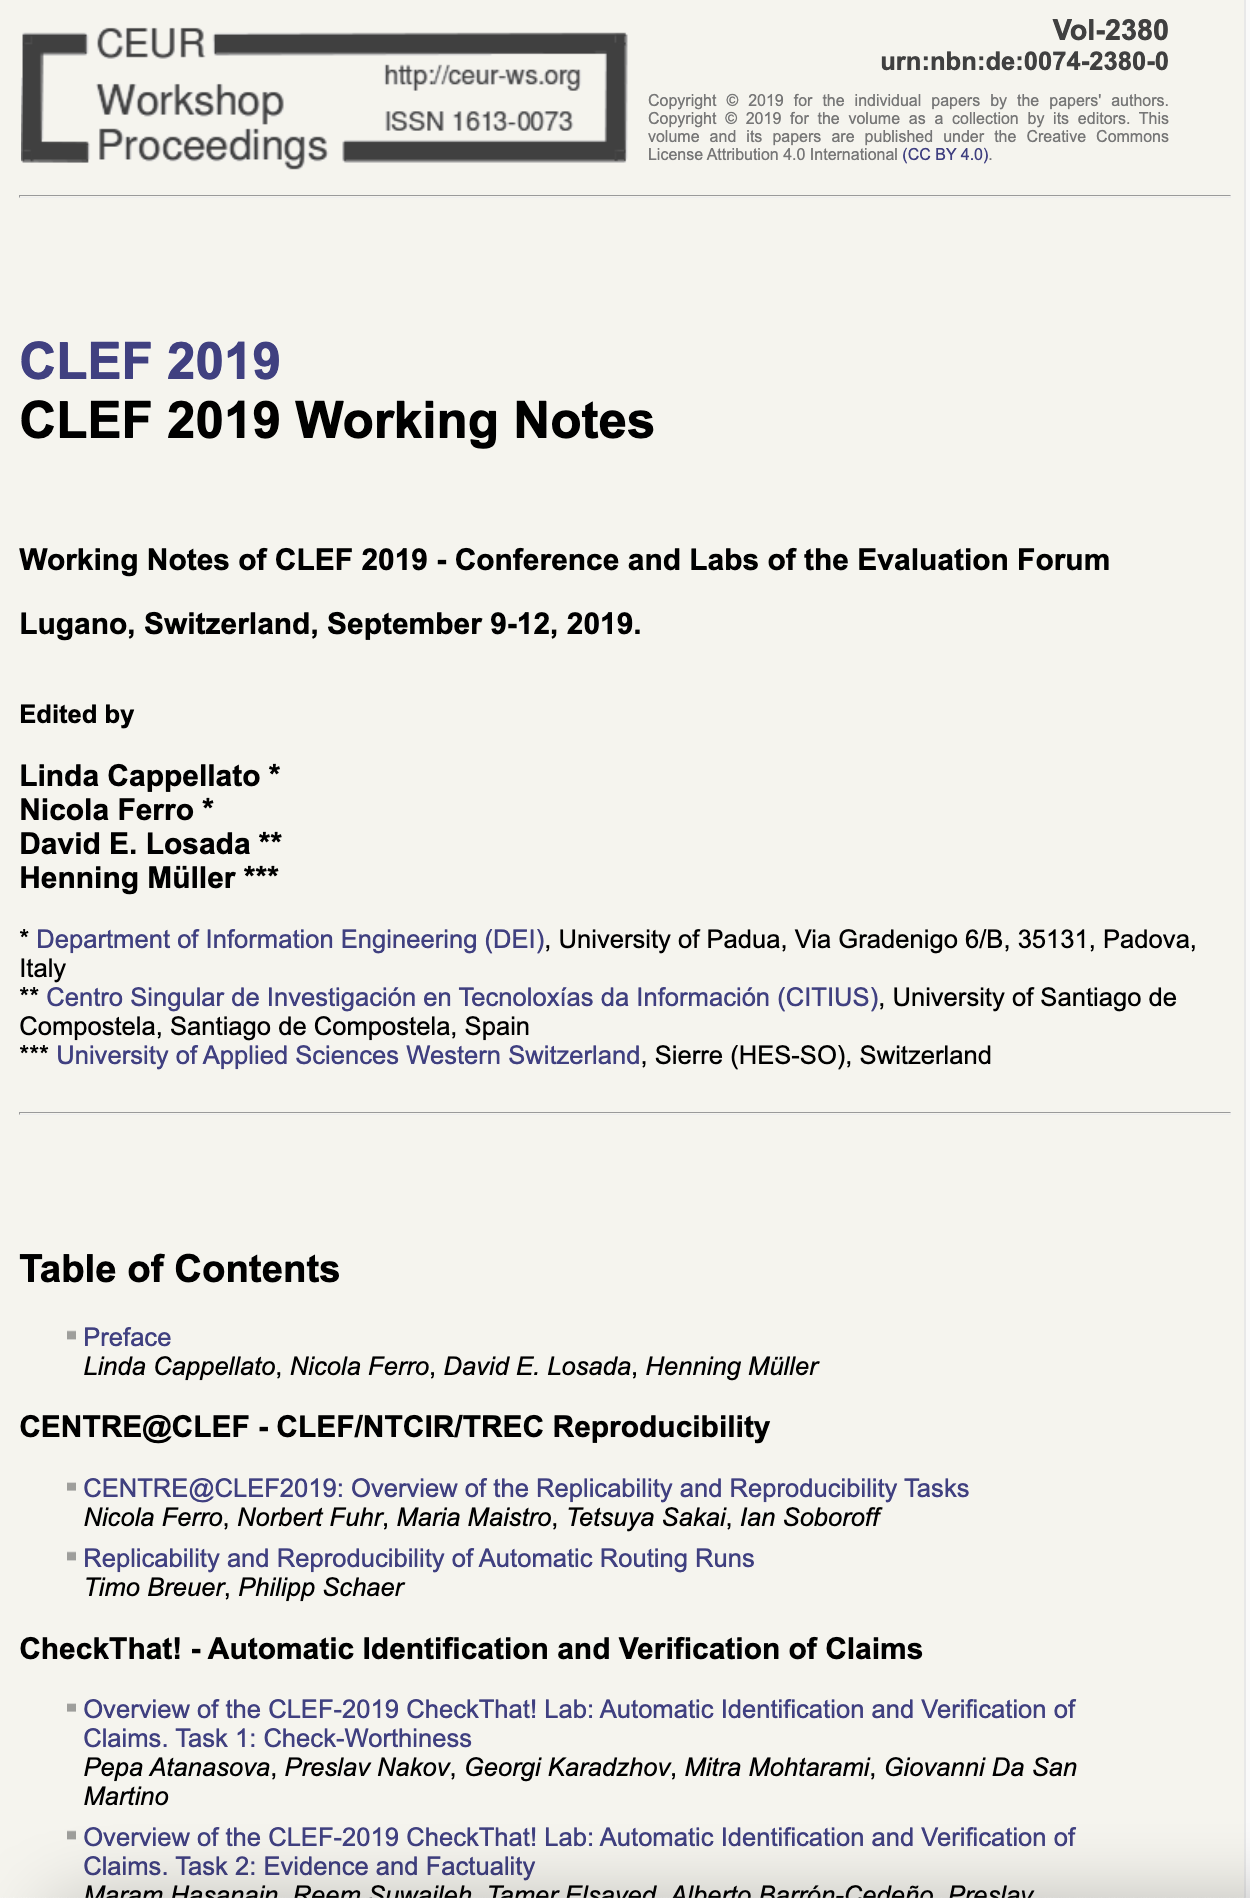 CLEF 2019 CEUR-WS Working Notes page